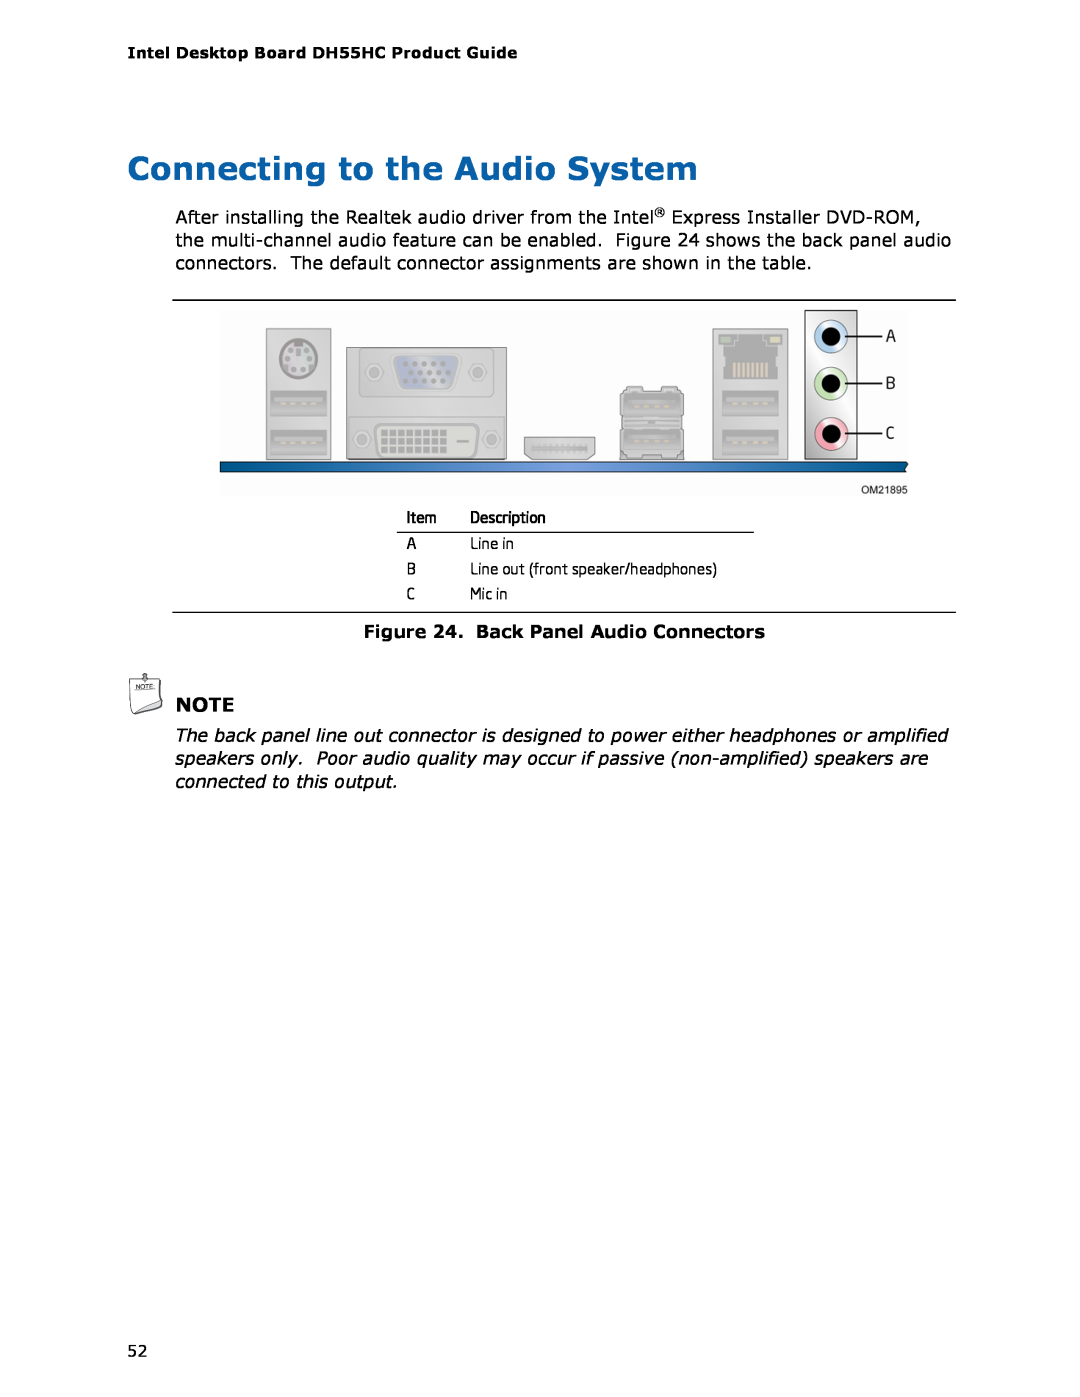 Intel BOXDH55HC manual Connecting to the Audio System, Back Panel Audio Connectors 